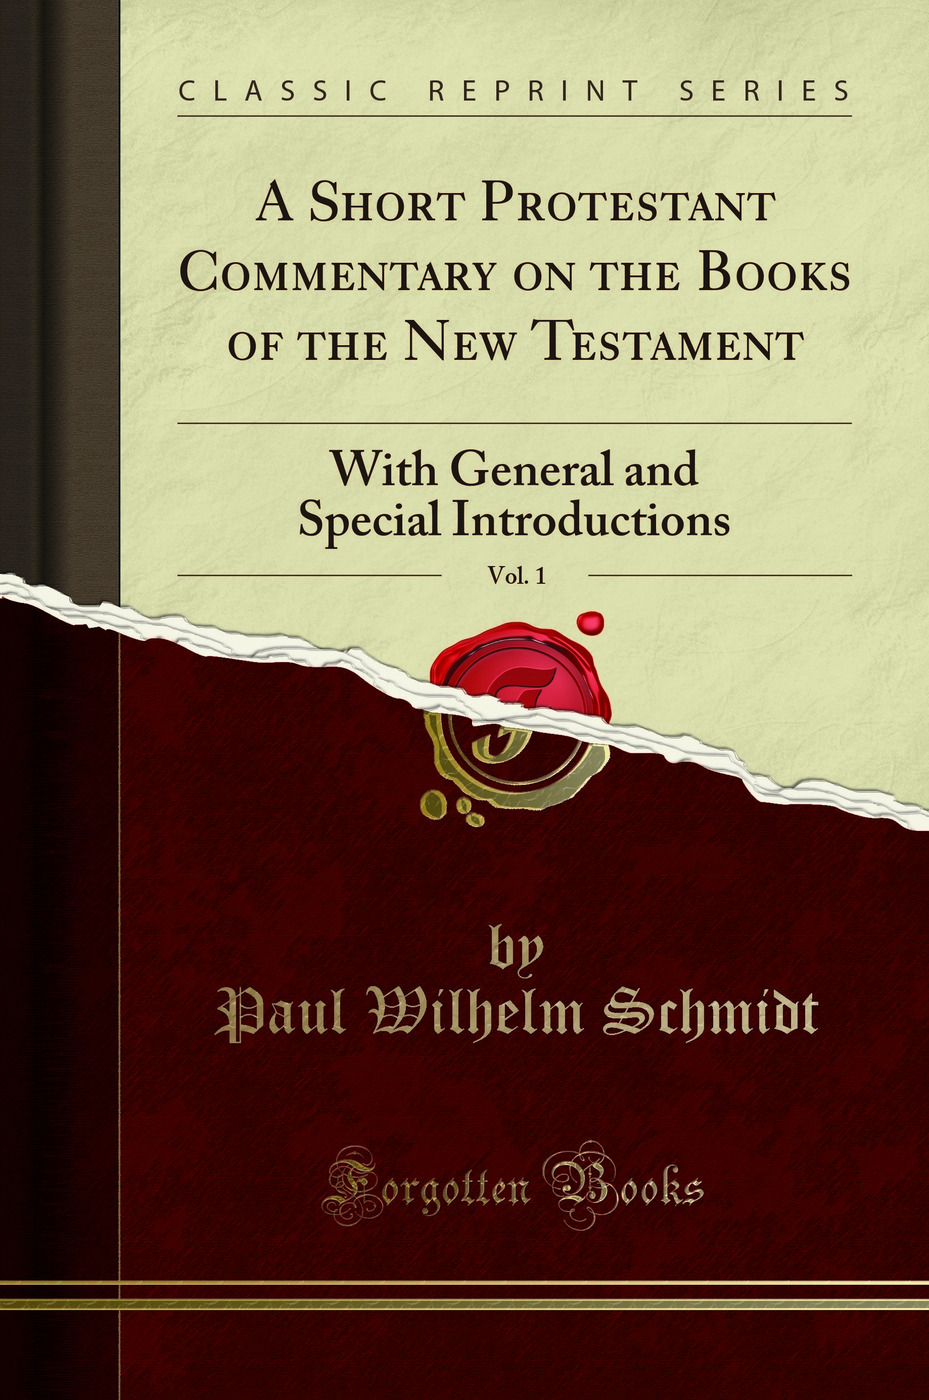 A Short Protestant Commentary on the Books of the New Testament, Vol. 1 - Paul Wilhelm Schmidt, Franz von Holzendorff